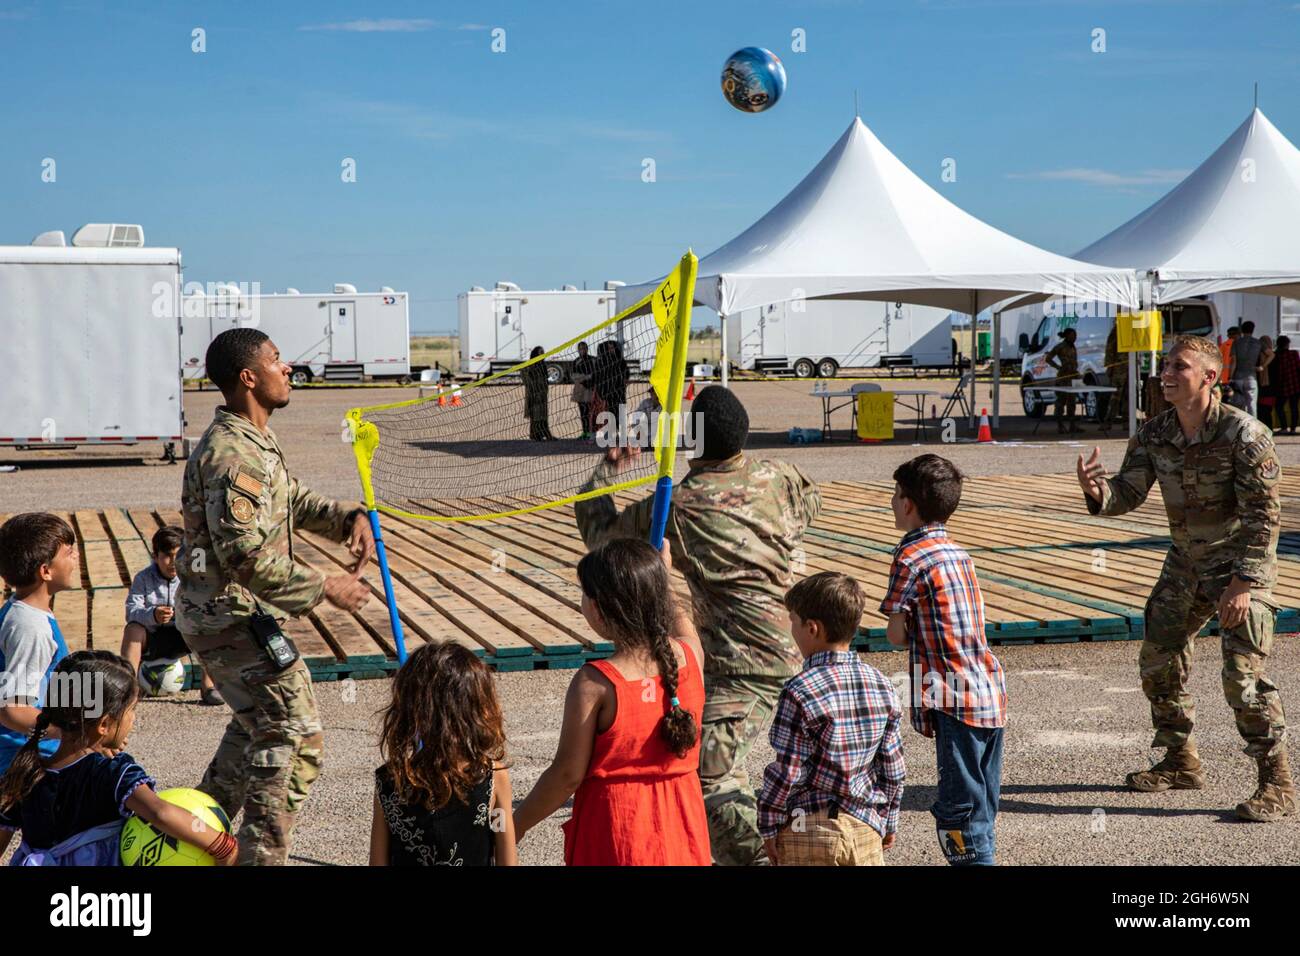 U.S. Air Force airmen play a game of volleyball with young Afghan refugees evacuated from Kabul during their stay at Holloman Air Force Base September 3, 2021 in Alamogordo, New Mexico. Holloman has created temporary housing for at least 50,000 Afghan evacuees. Stock Photo